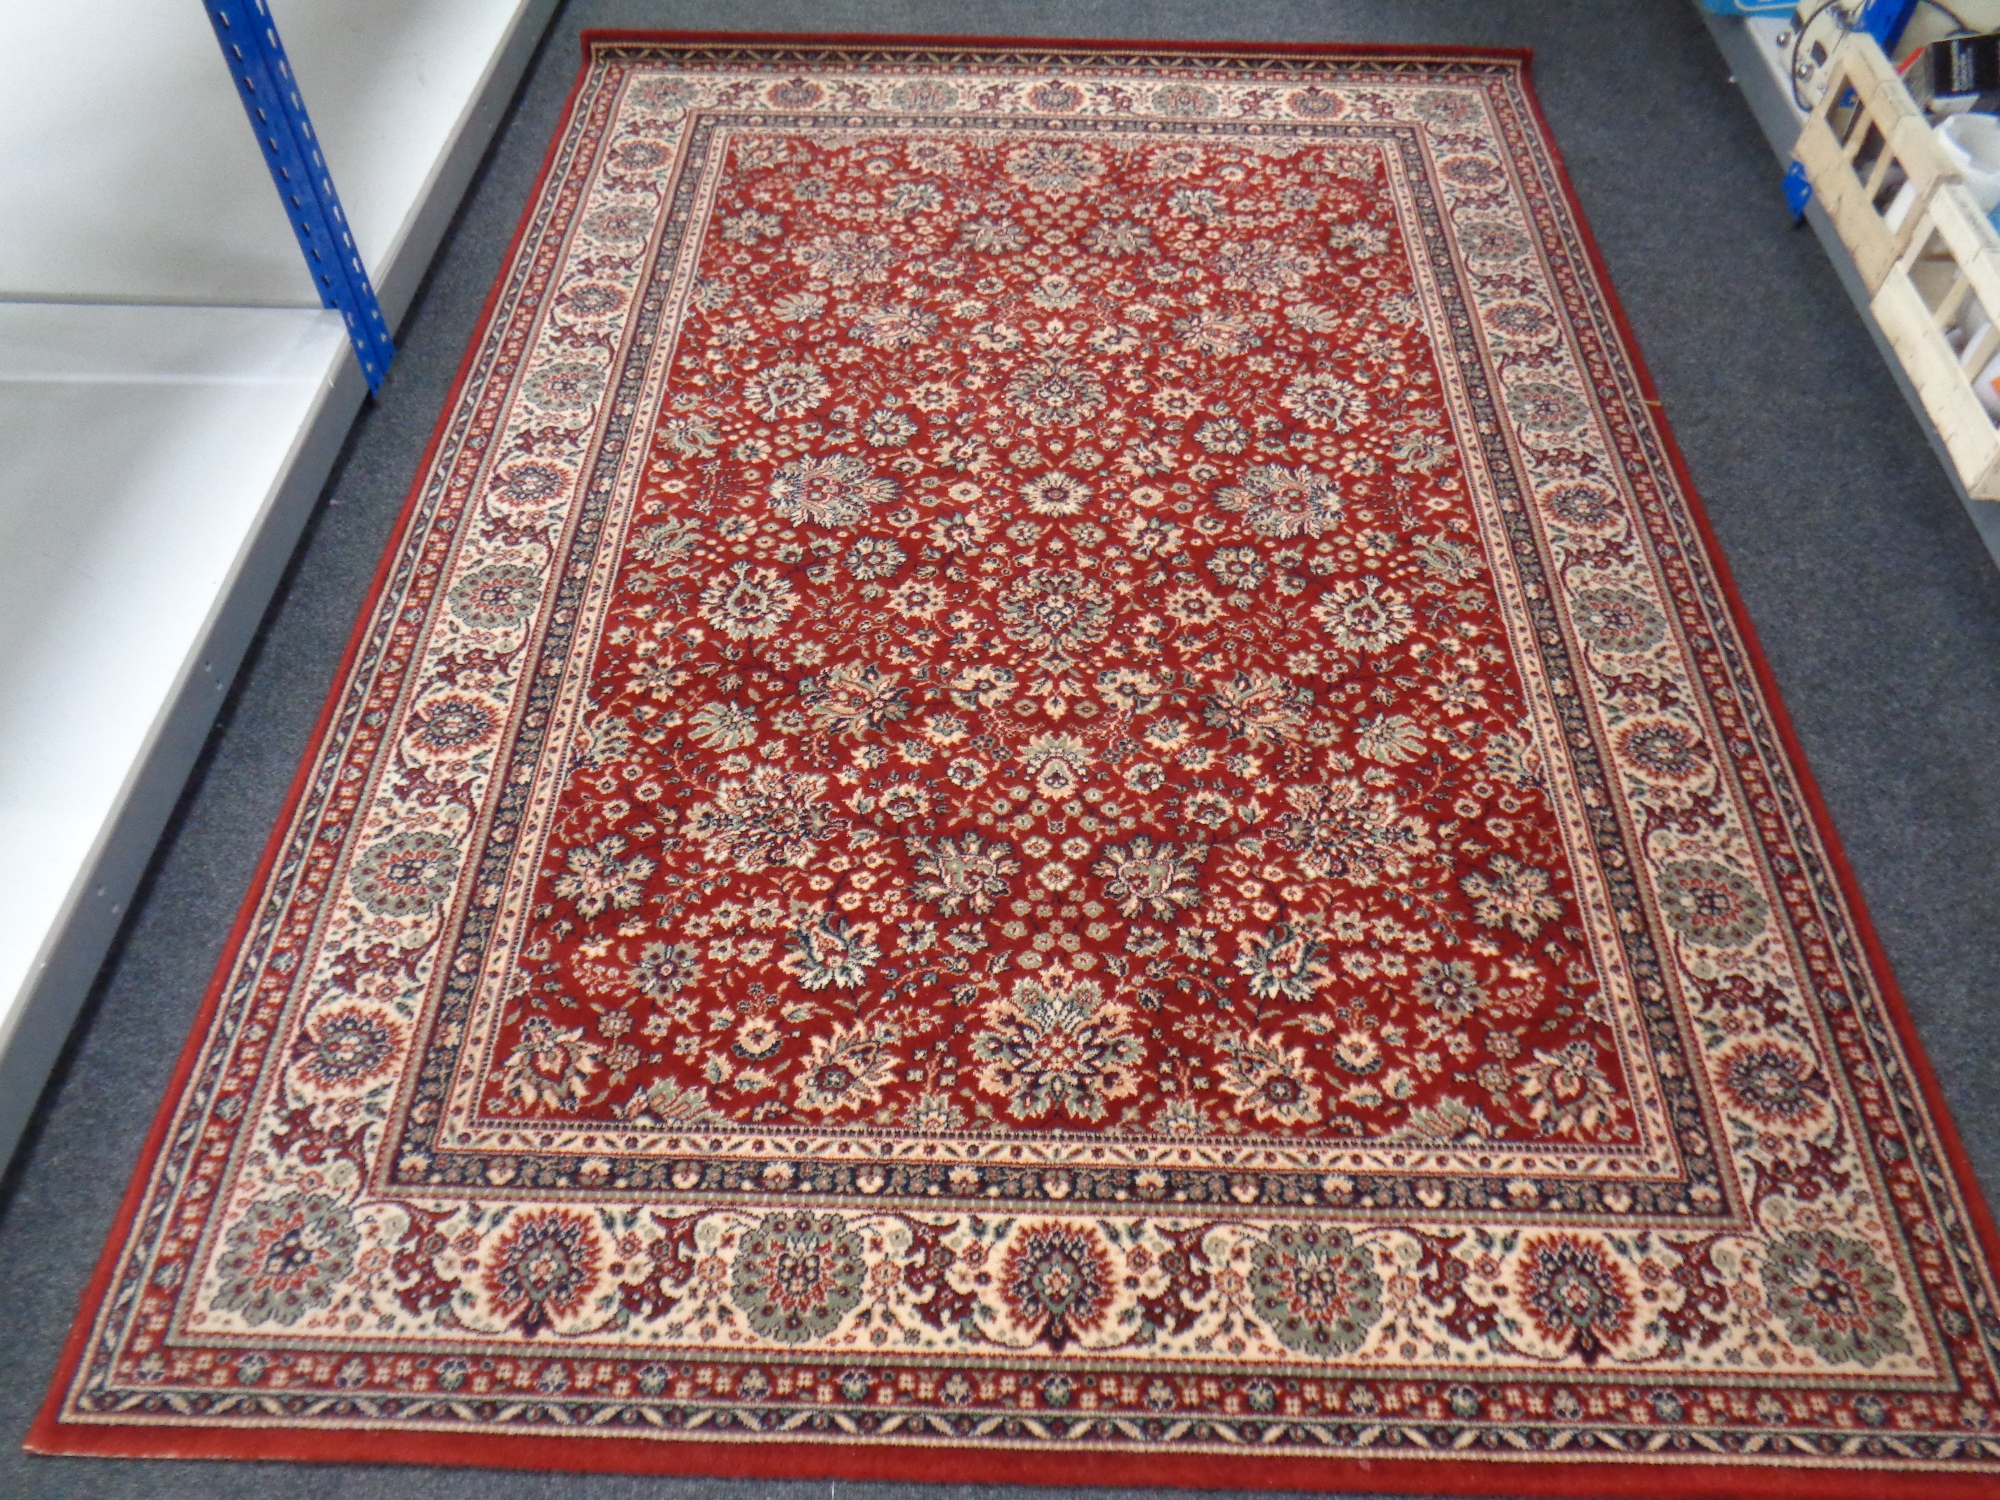 A machined Persian design rug on red ground